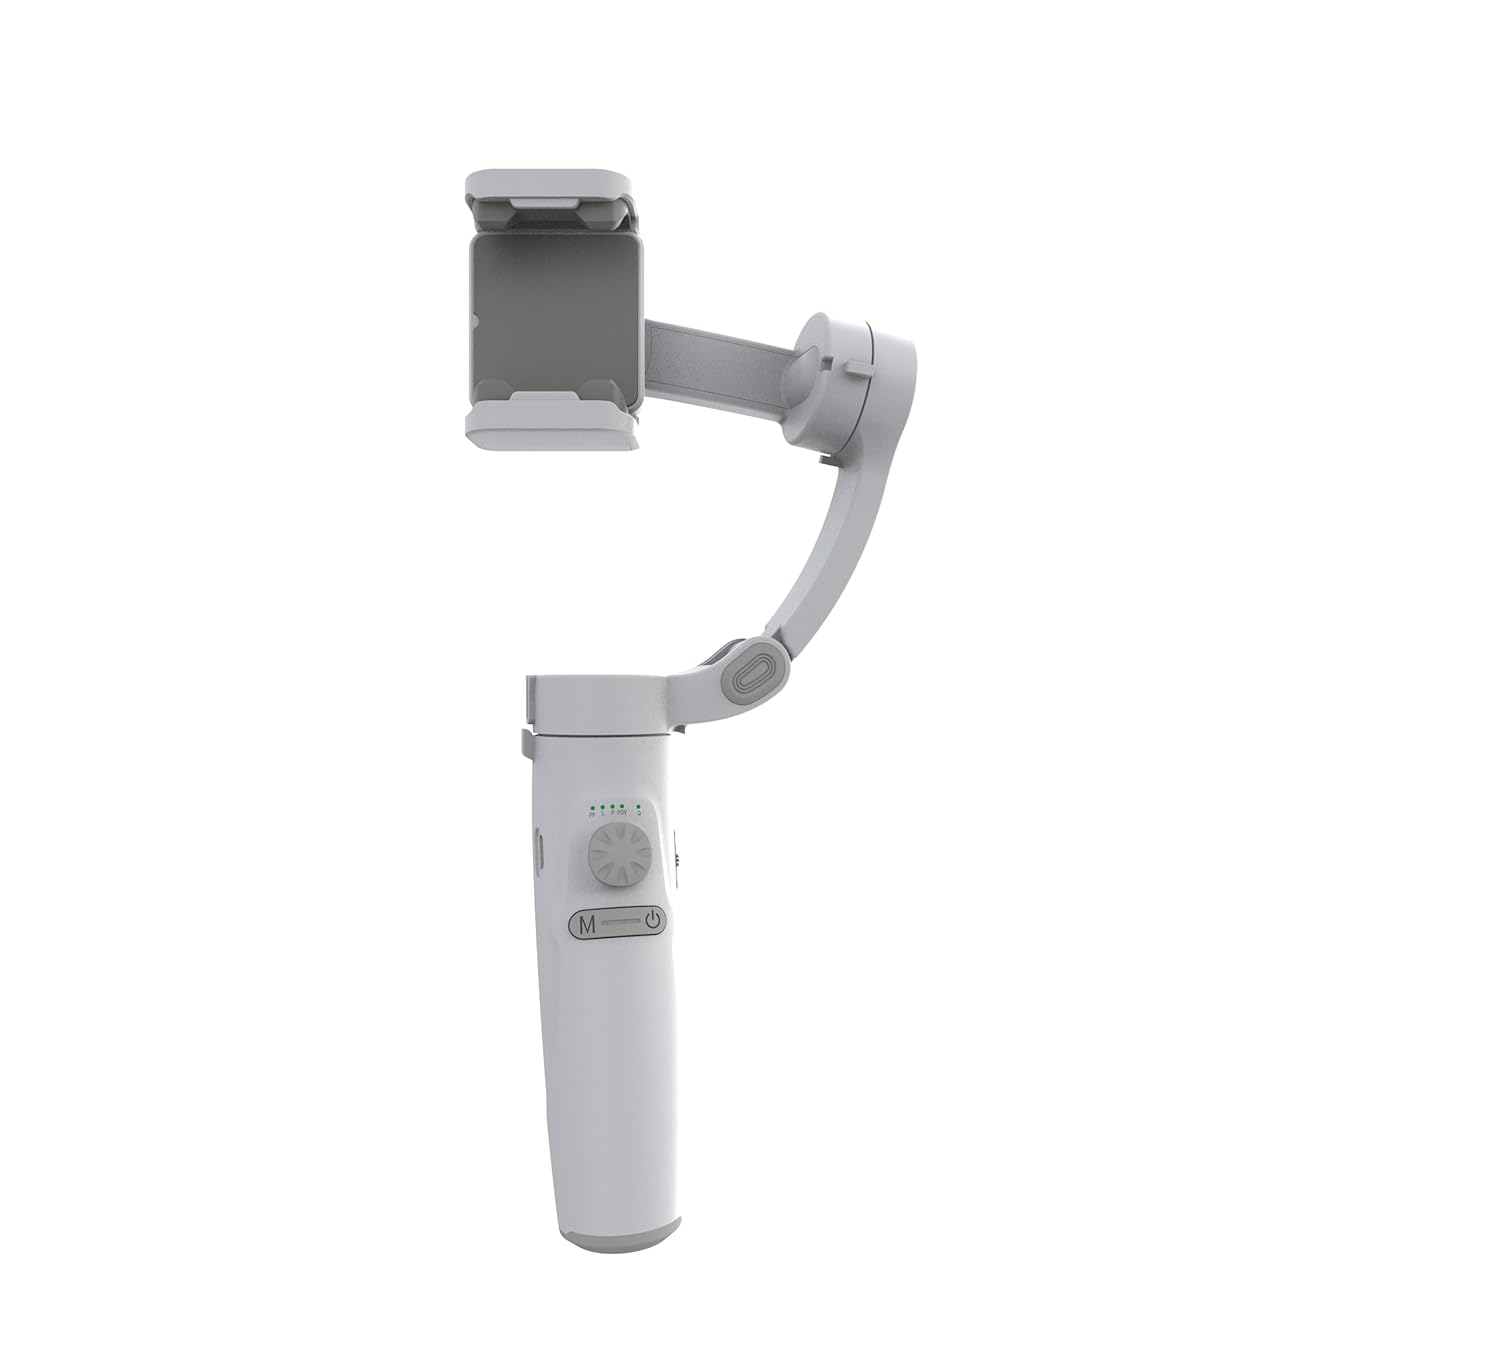 Digitek (DSG-002) is a 3 Axis Gimbal Stabilizer Specially Designed for Mobile Phones with Magnetic Fill Light